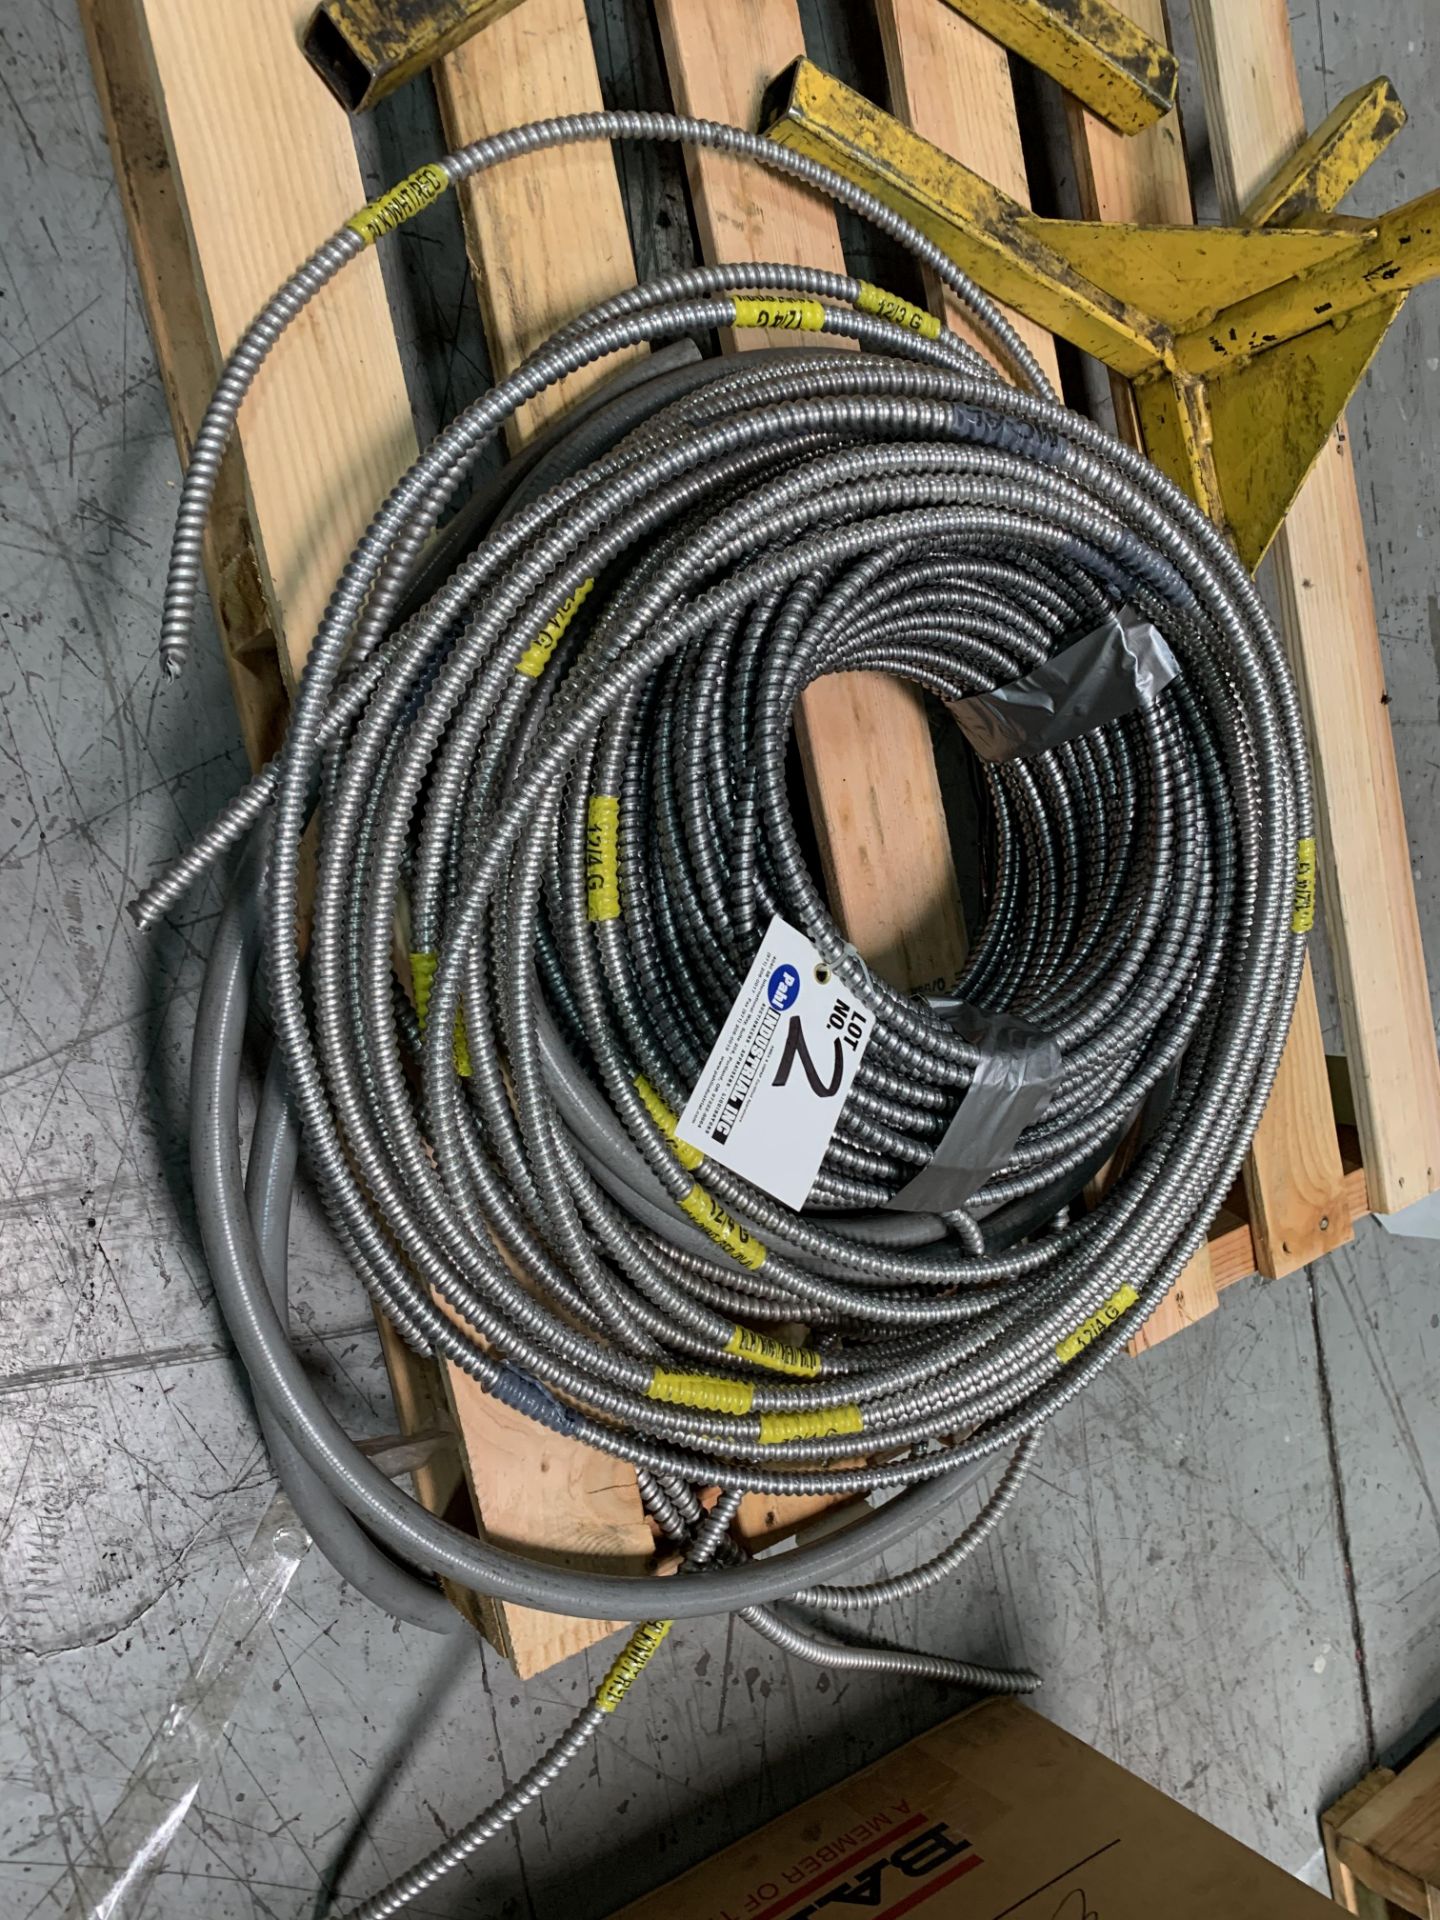 Coil of assorted Conduit